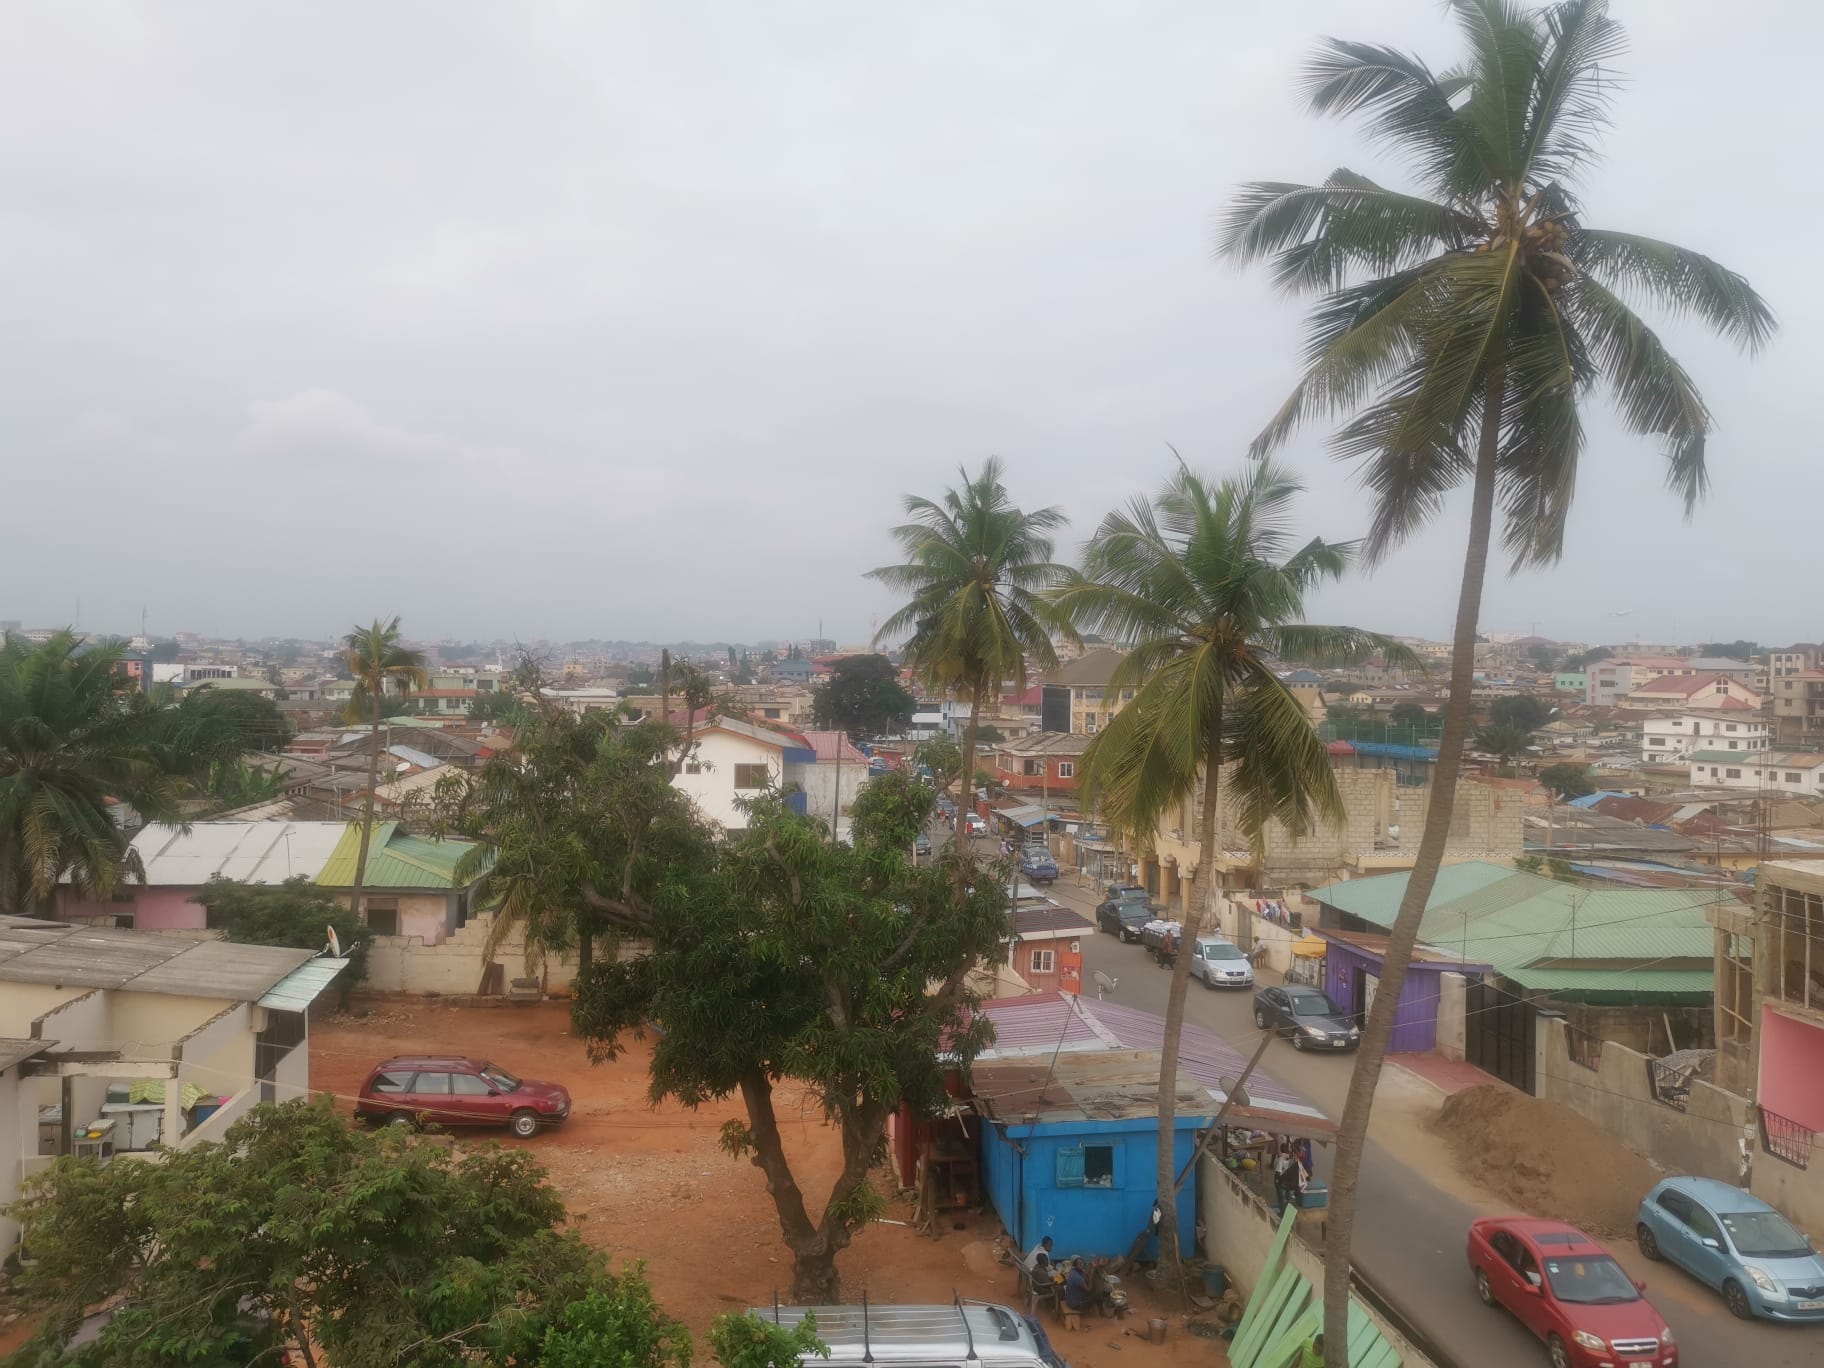 View of the street in Accra City, Ghana